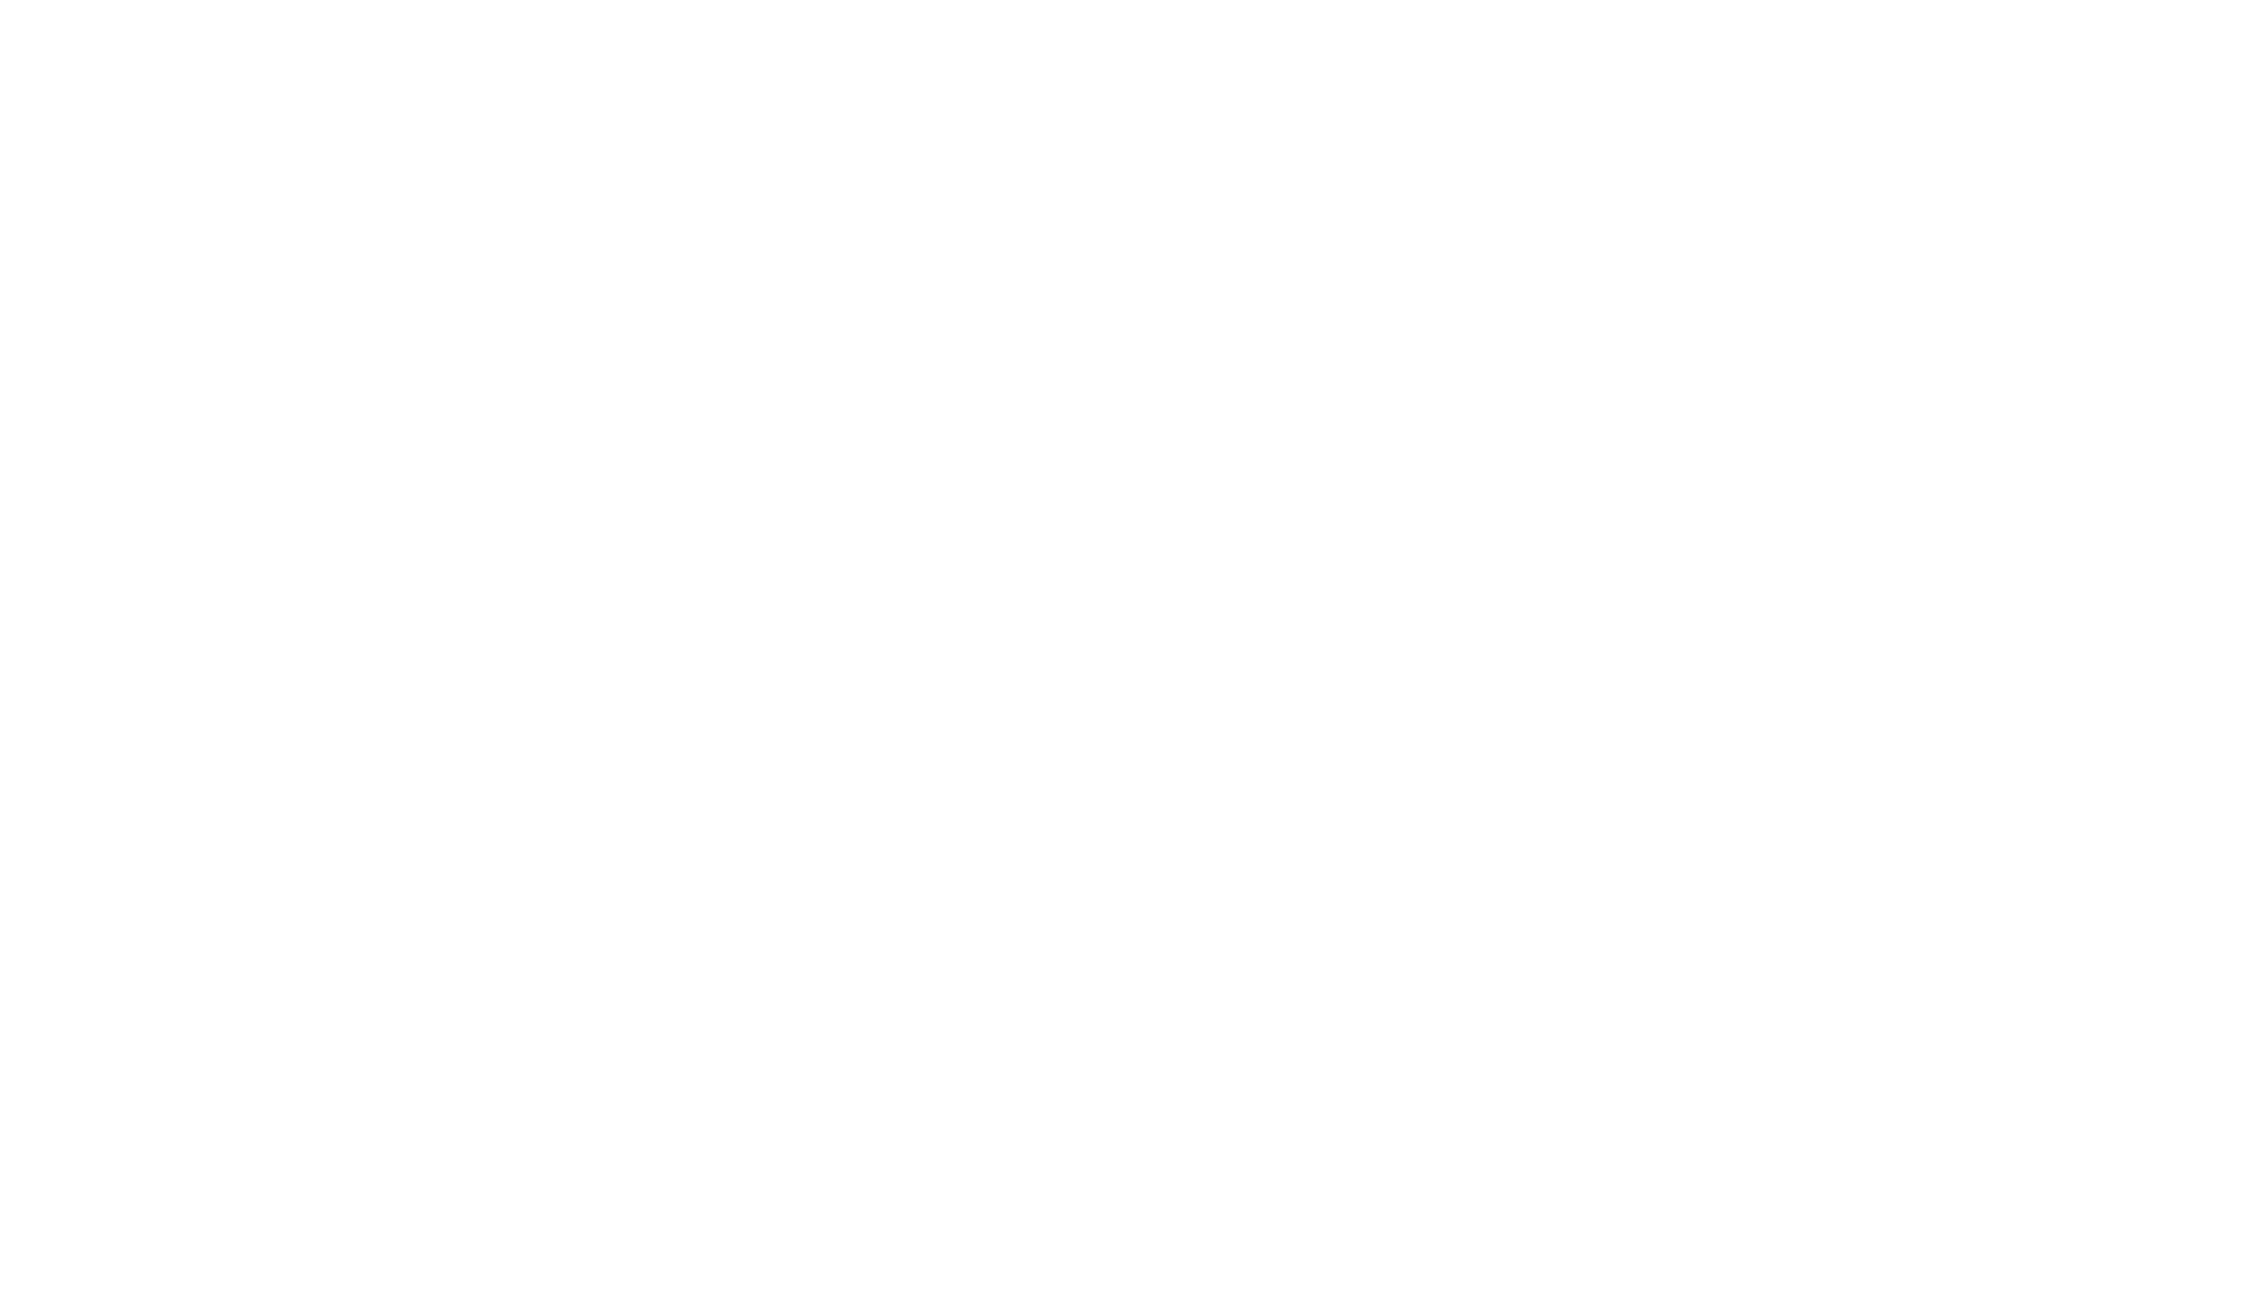 The Clouser Group